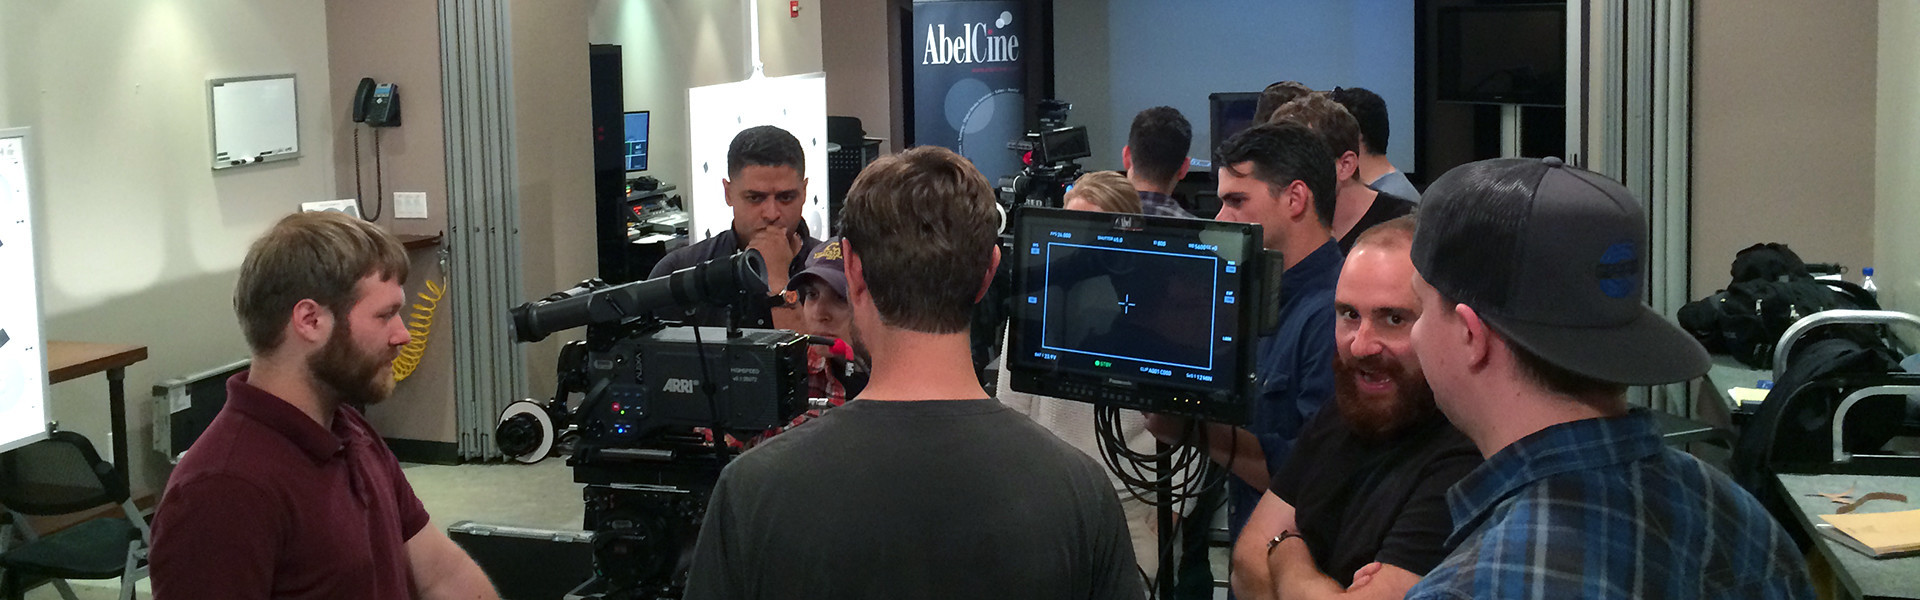 Header image for article ICG Local 600 Selects AbelCine to Create DIT Workshops